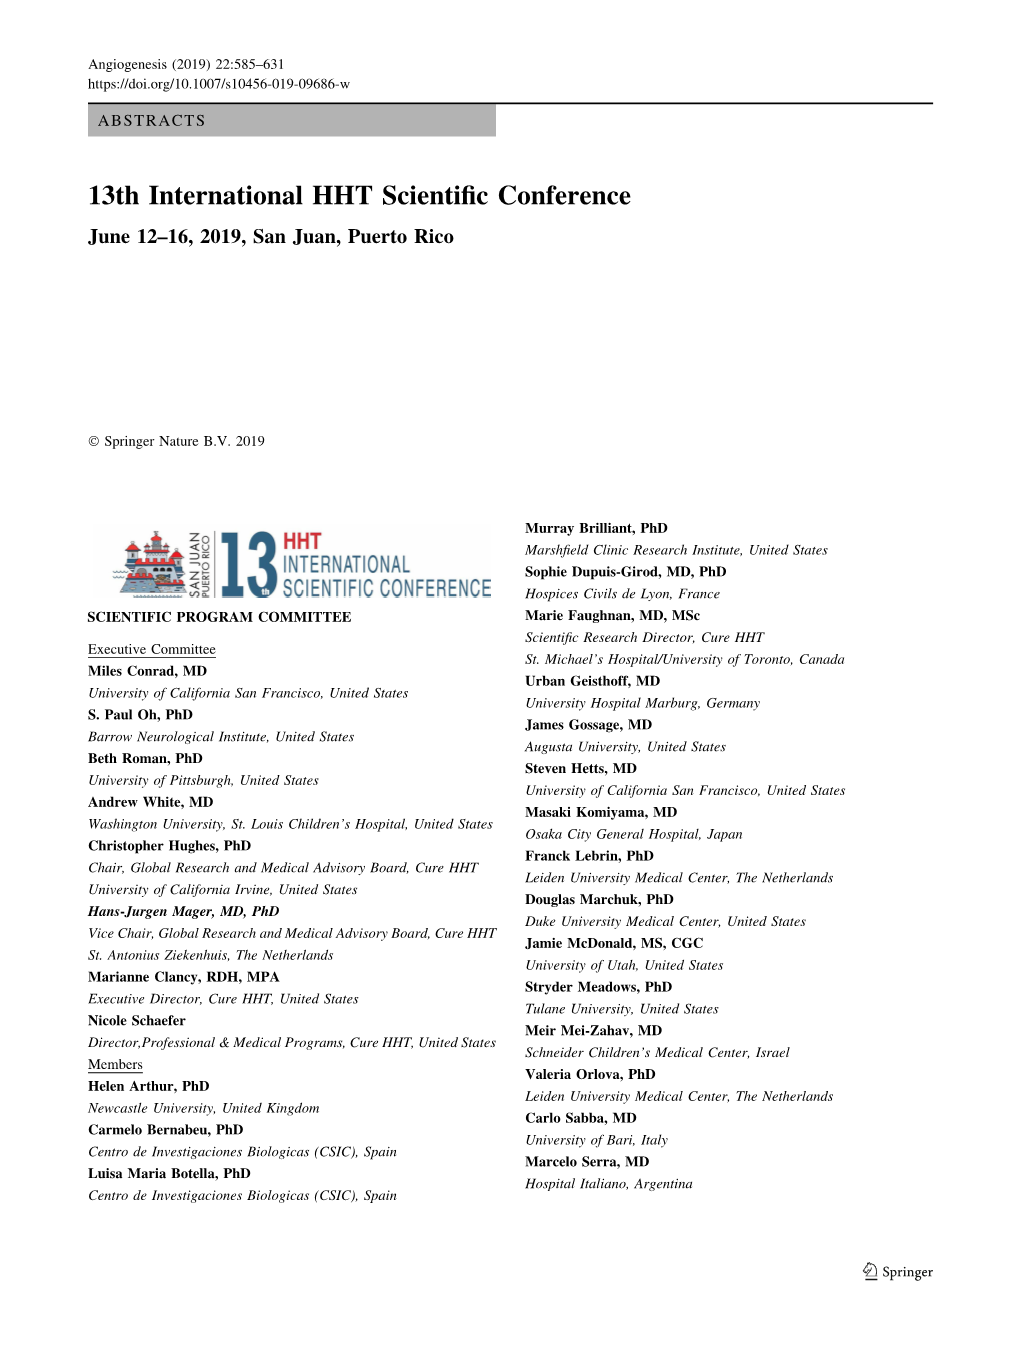 13Th HHT International HHT Scientific Conference